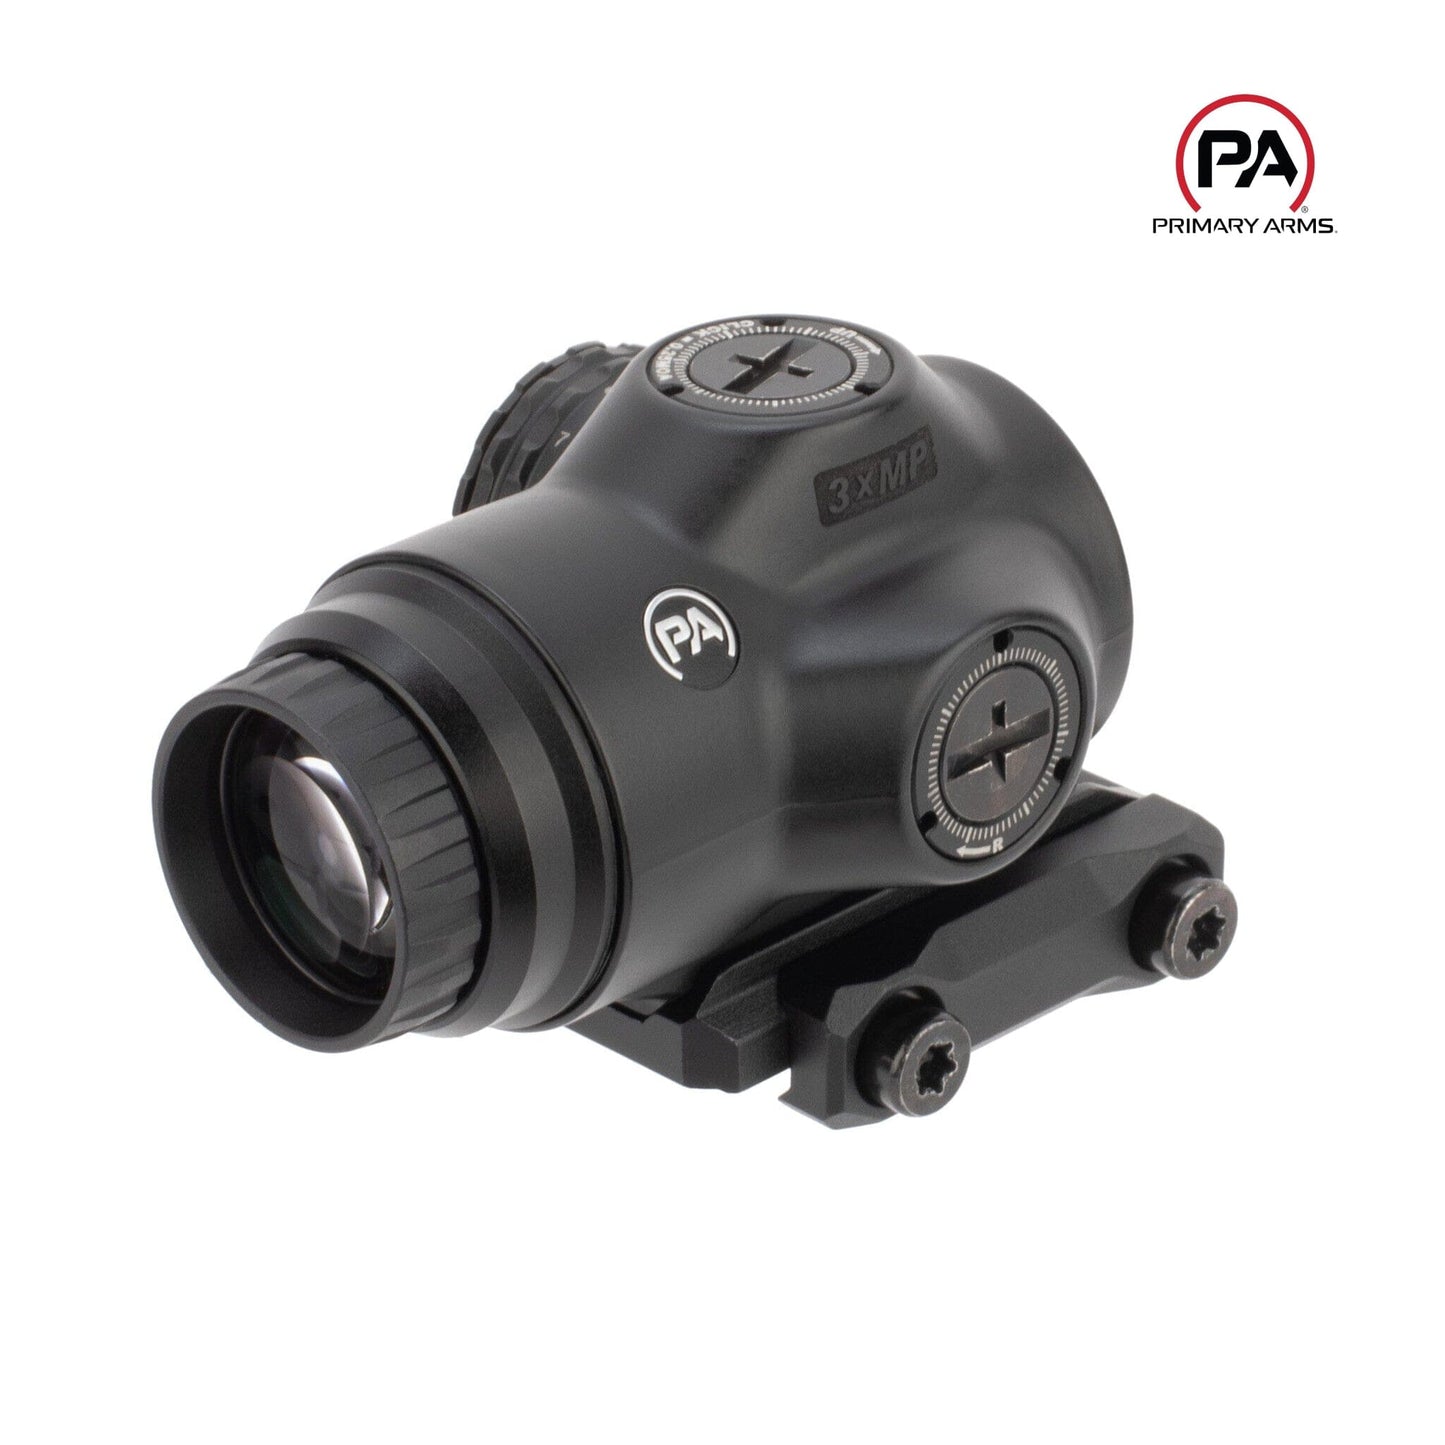 Primary Arms SLx 3x MicroPrism Sight - Red ACSS RAPTOR 5.56/.308 - Meter Reticle Prism Rifle Scope Primary Arms 